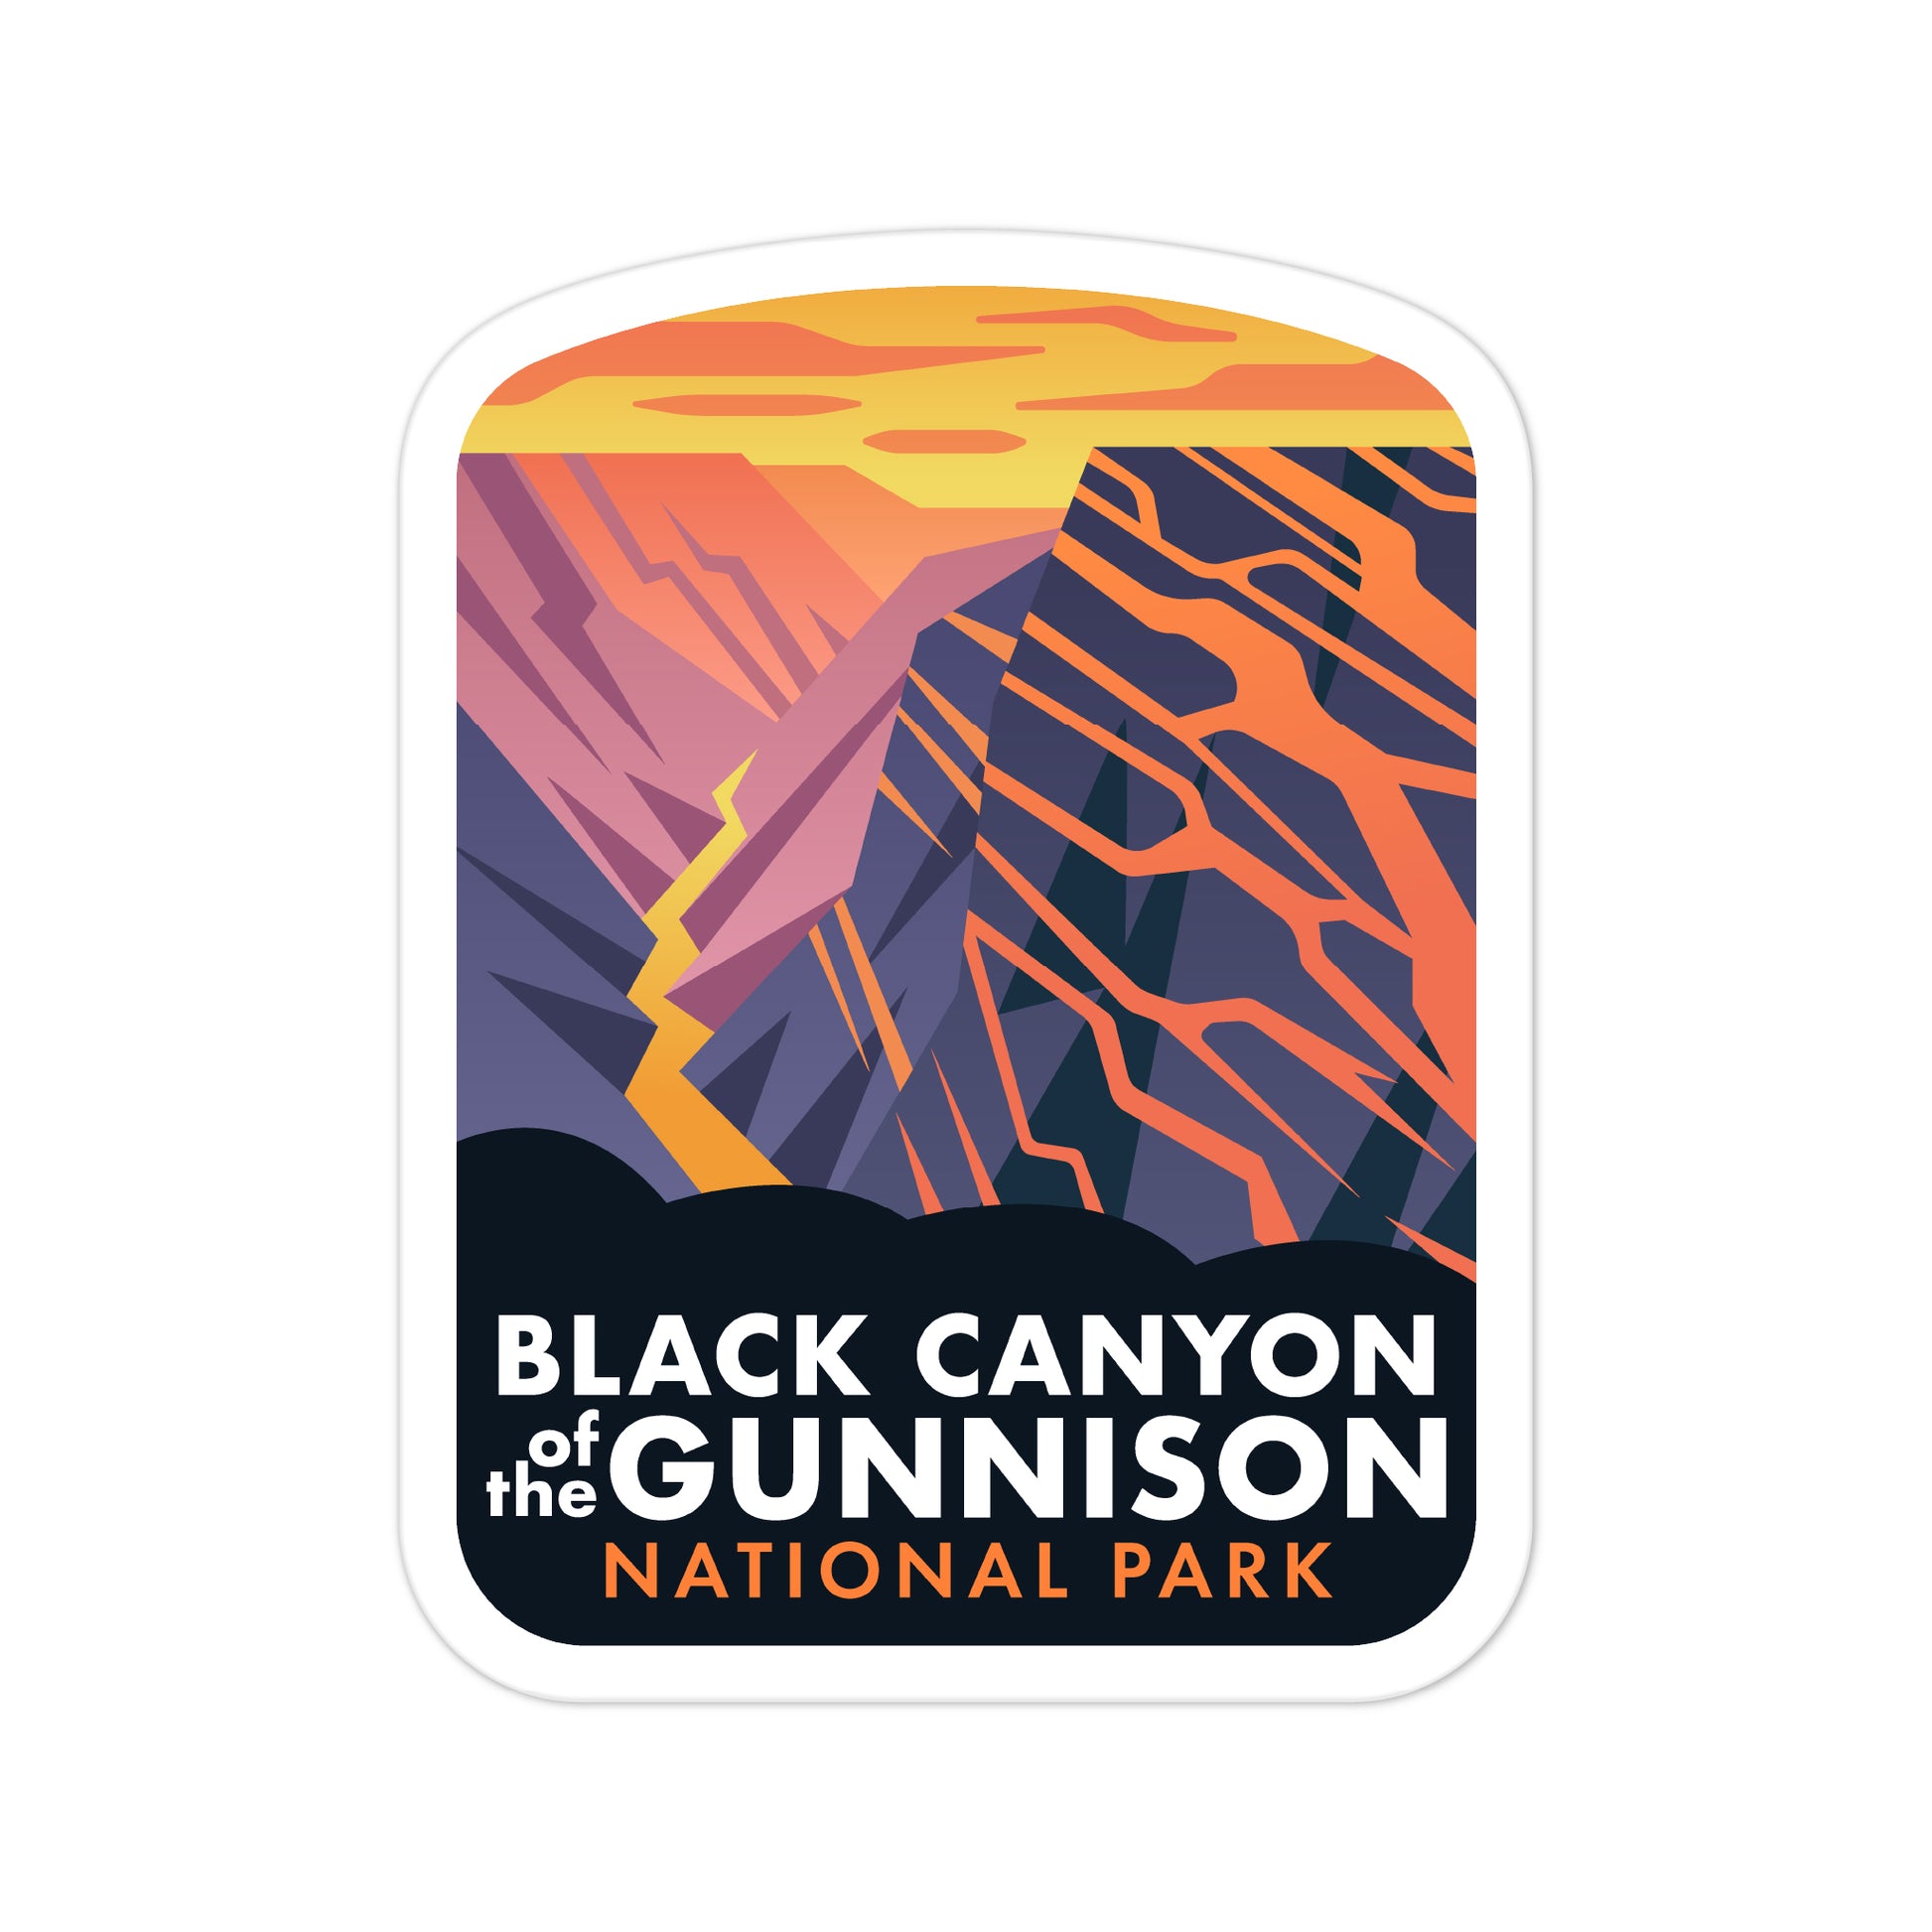 A sticker of Black Canyon of the Gunnison